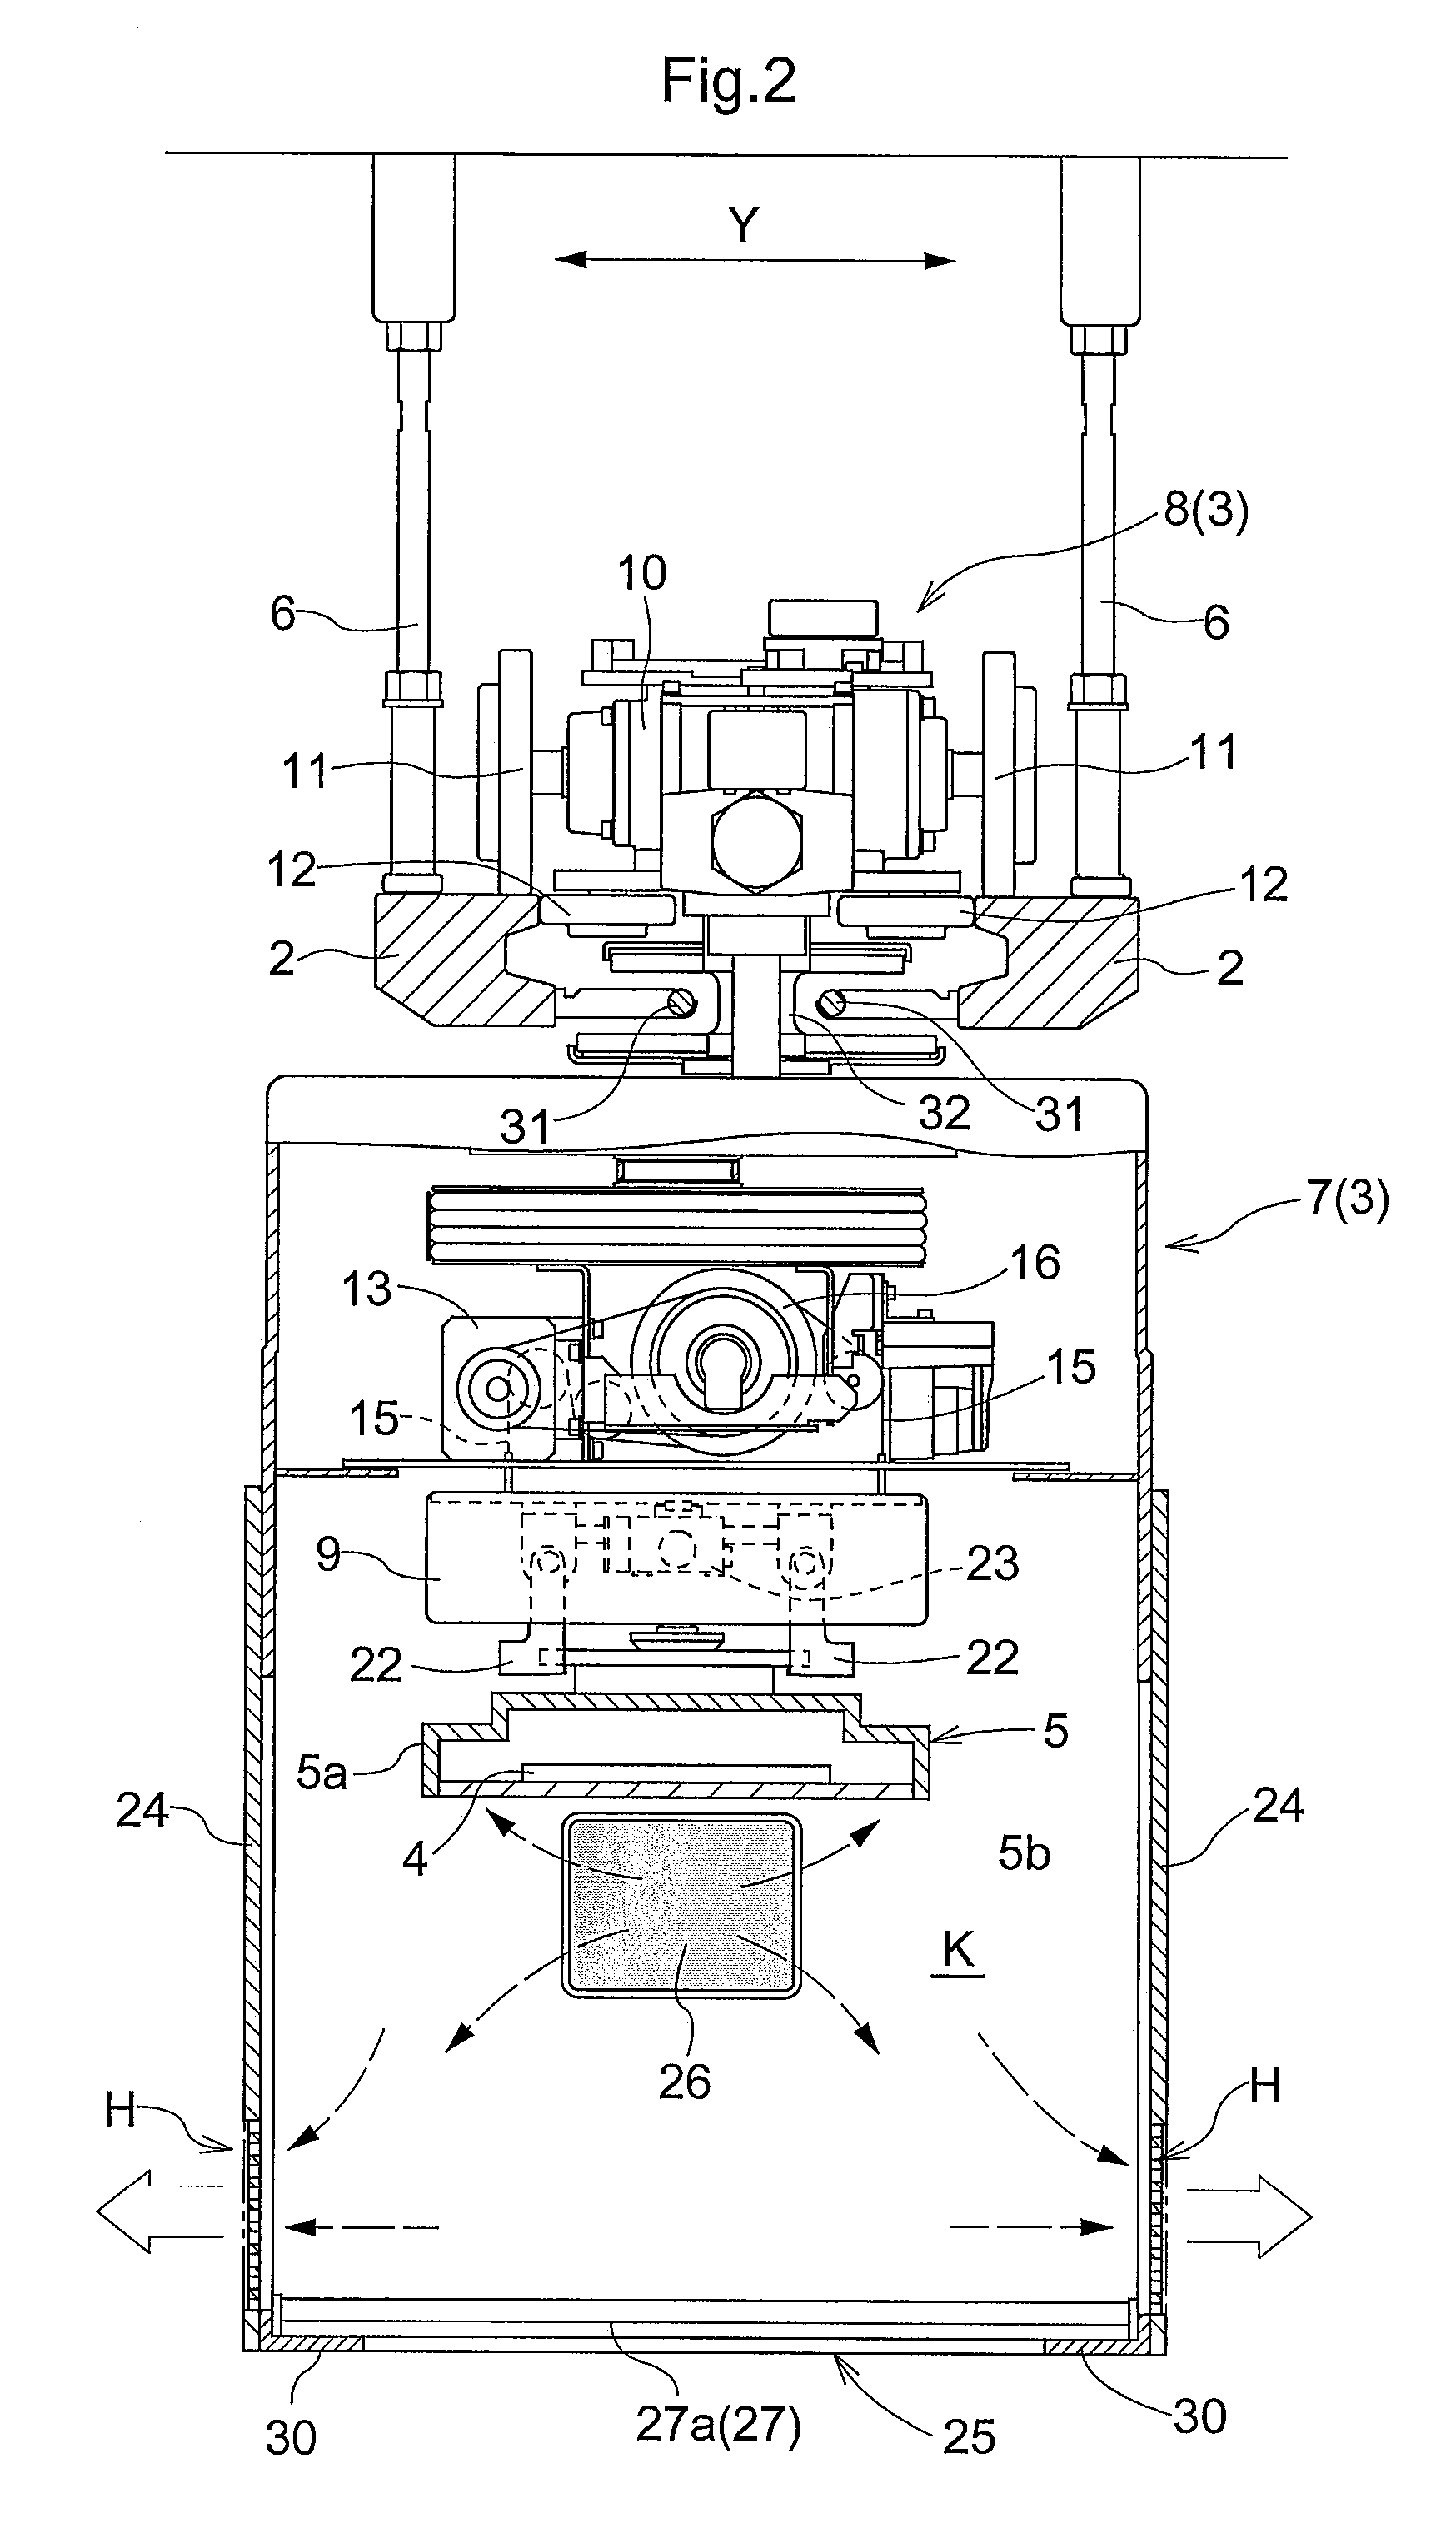 Article transport device